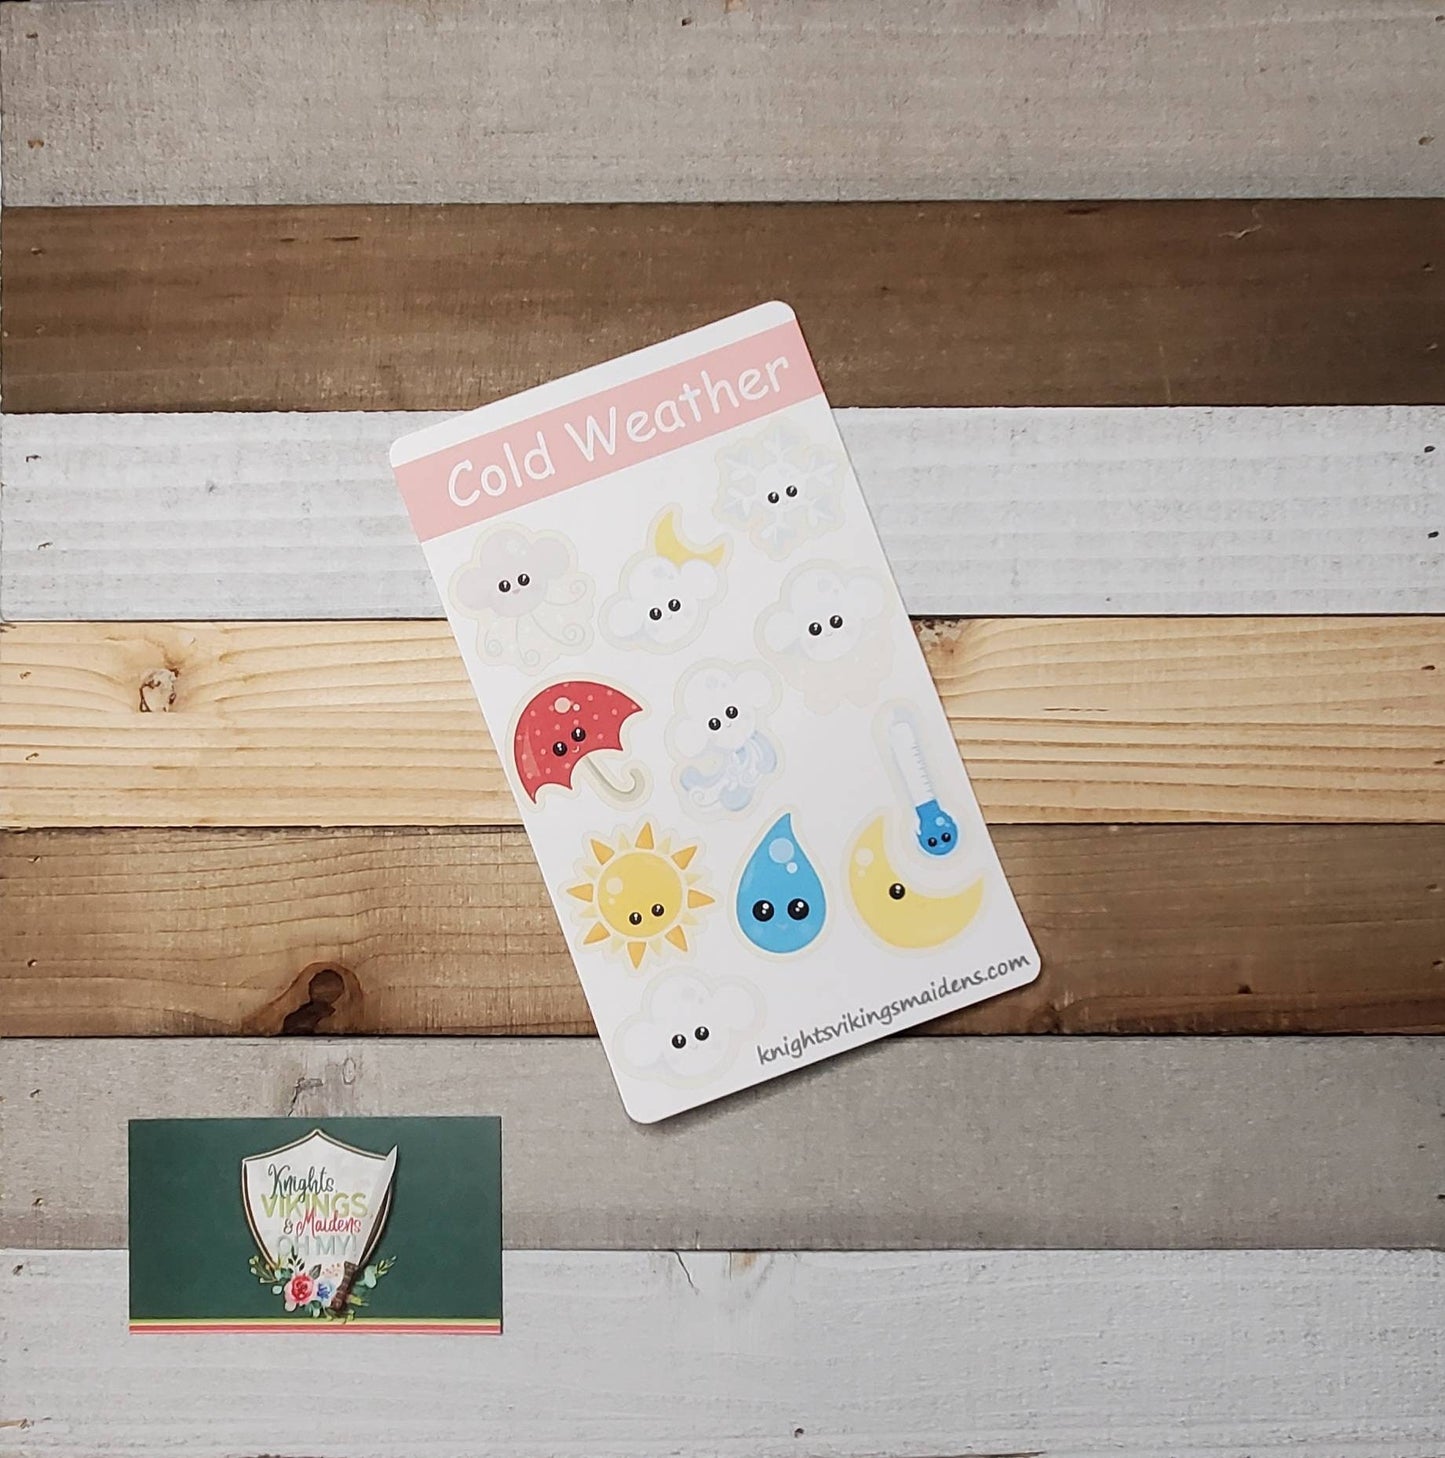 Kawaii Weather Stickers, Cold weather, Warm Weather, Bullet Journal, Planning Stickers, Meterology, Rain, Rainbow, Snow